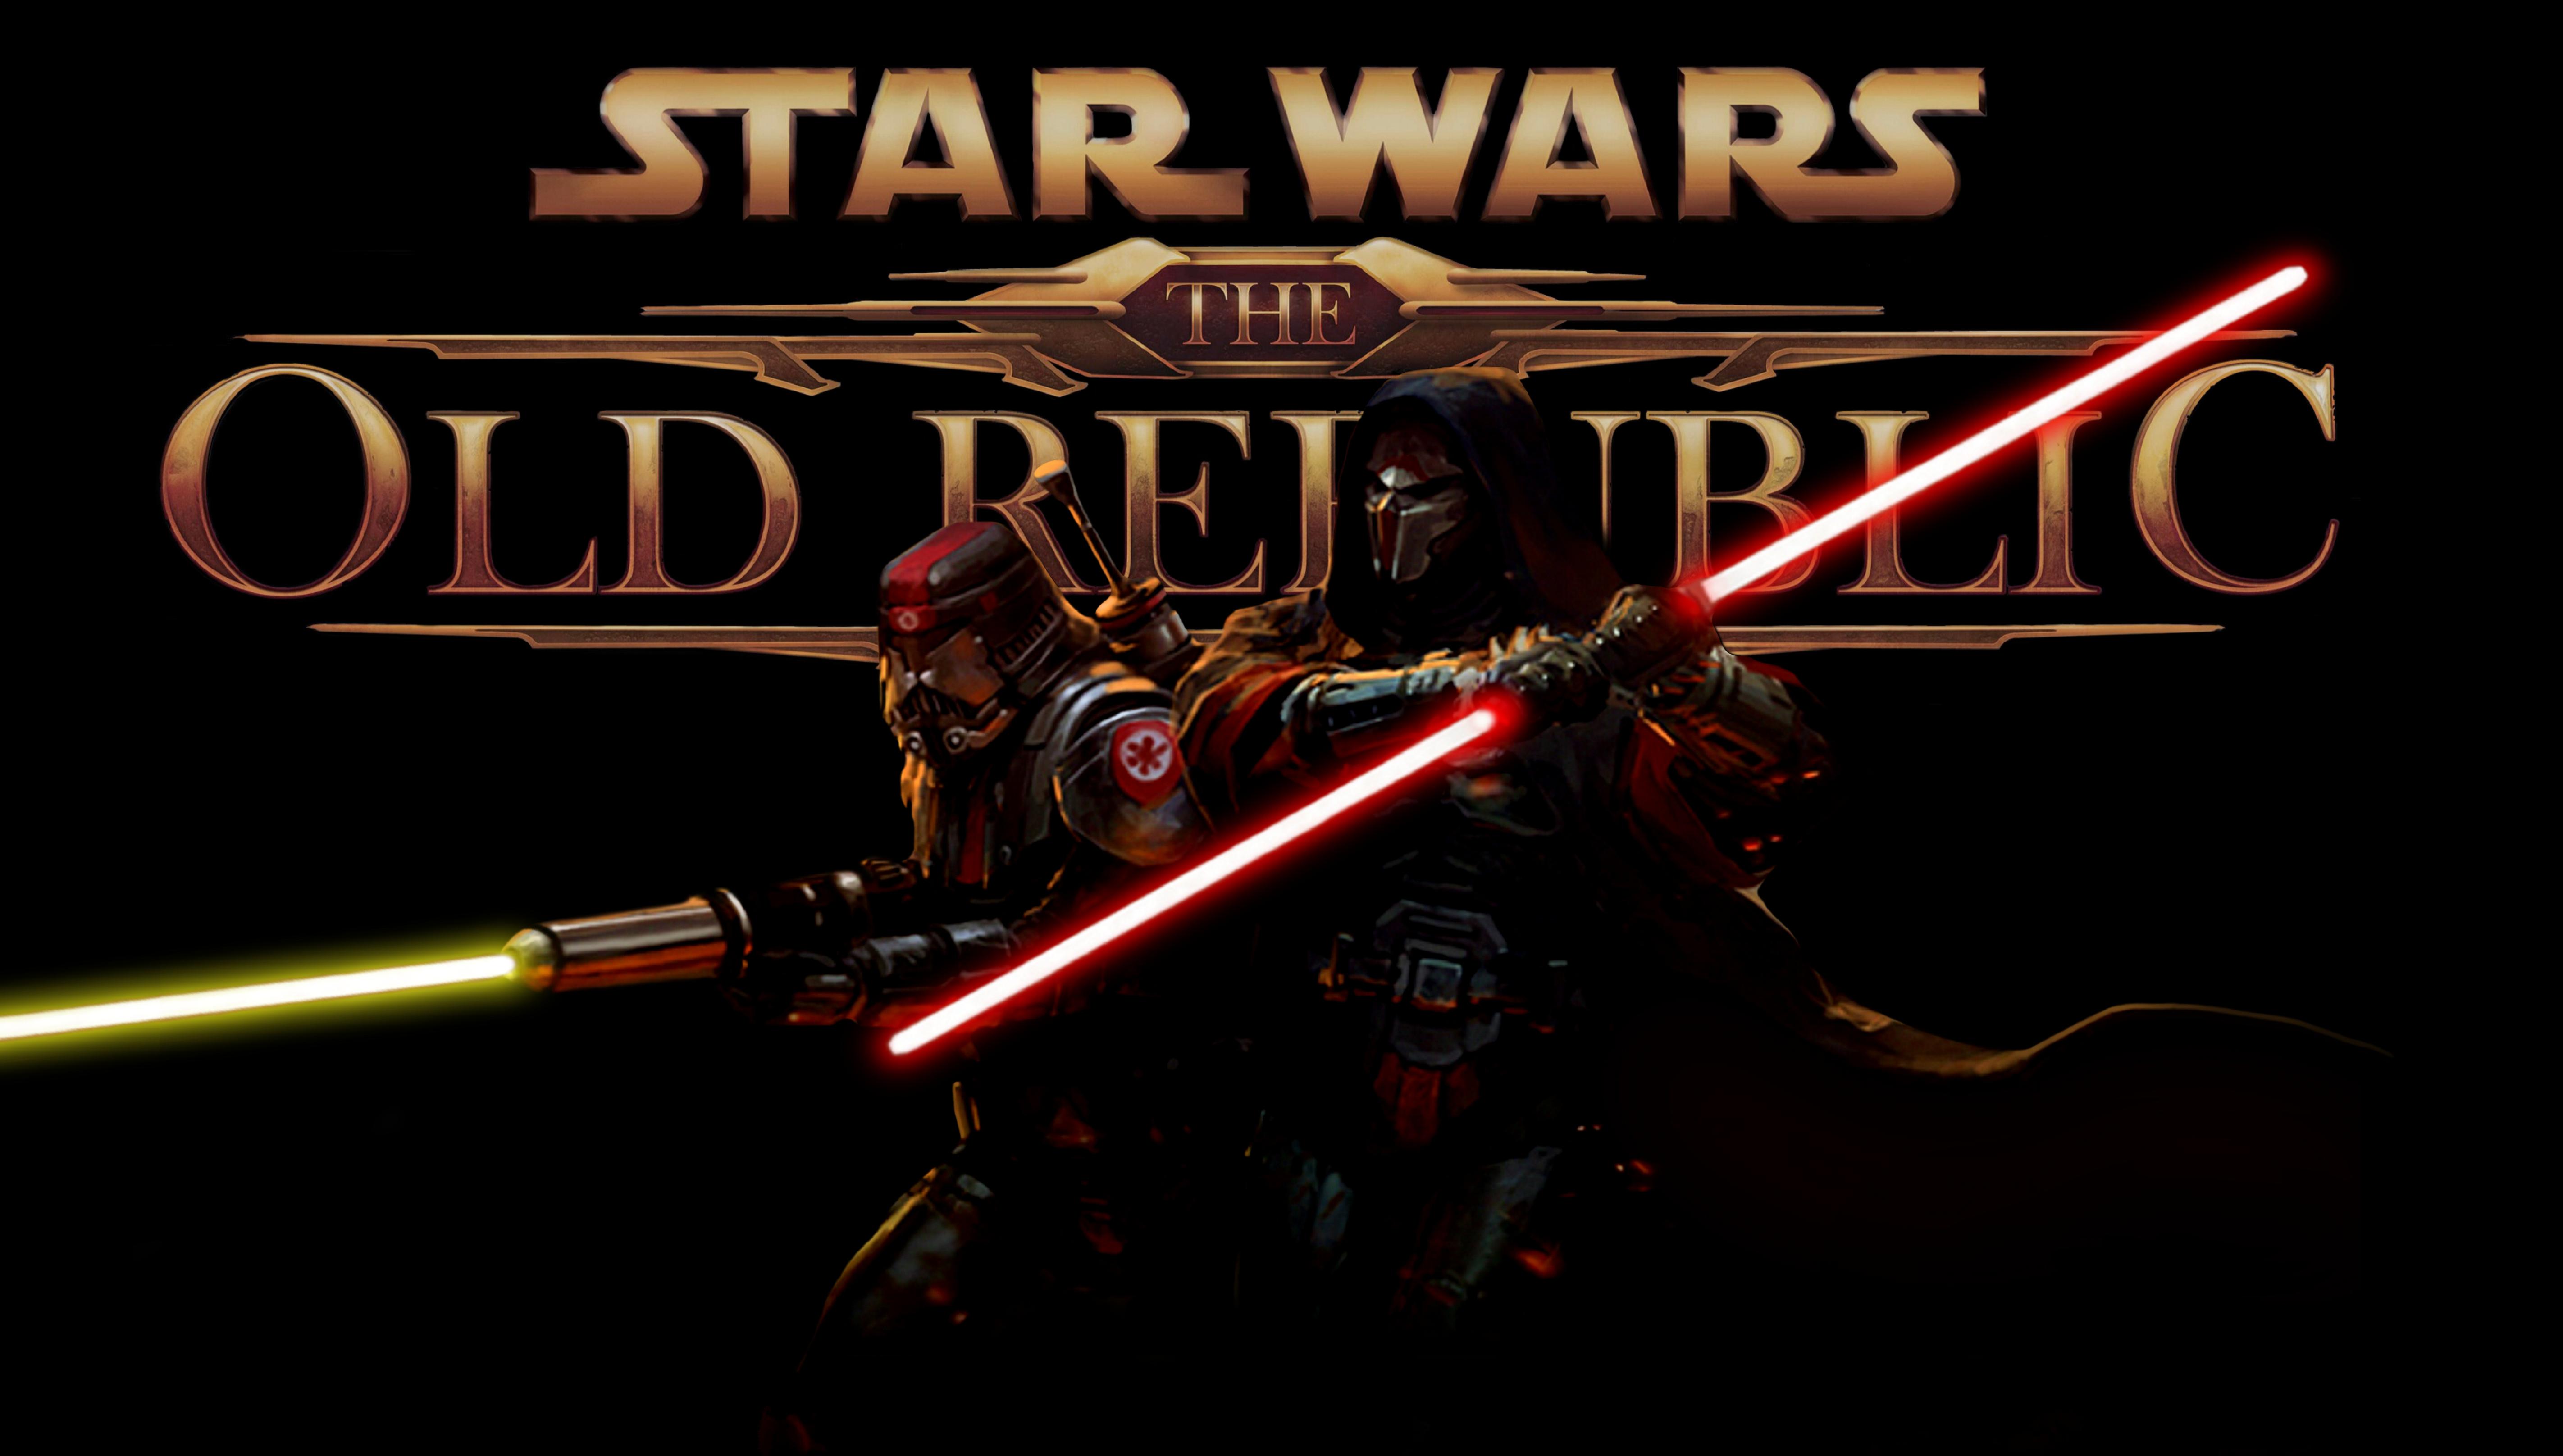 Star Wars: The Old Republic Background